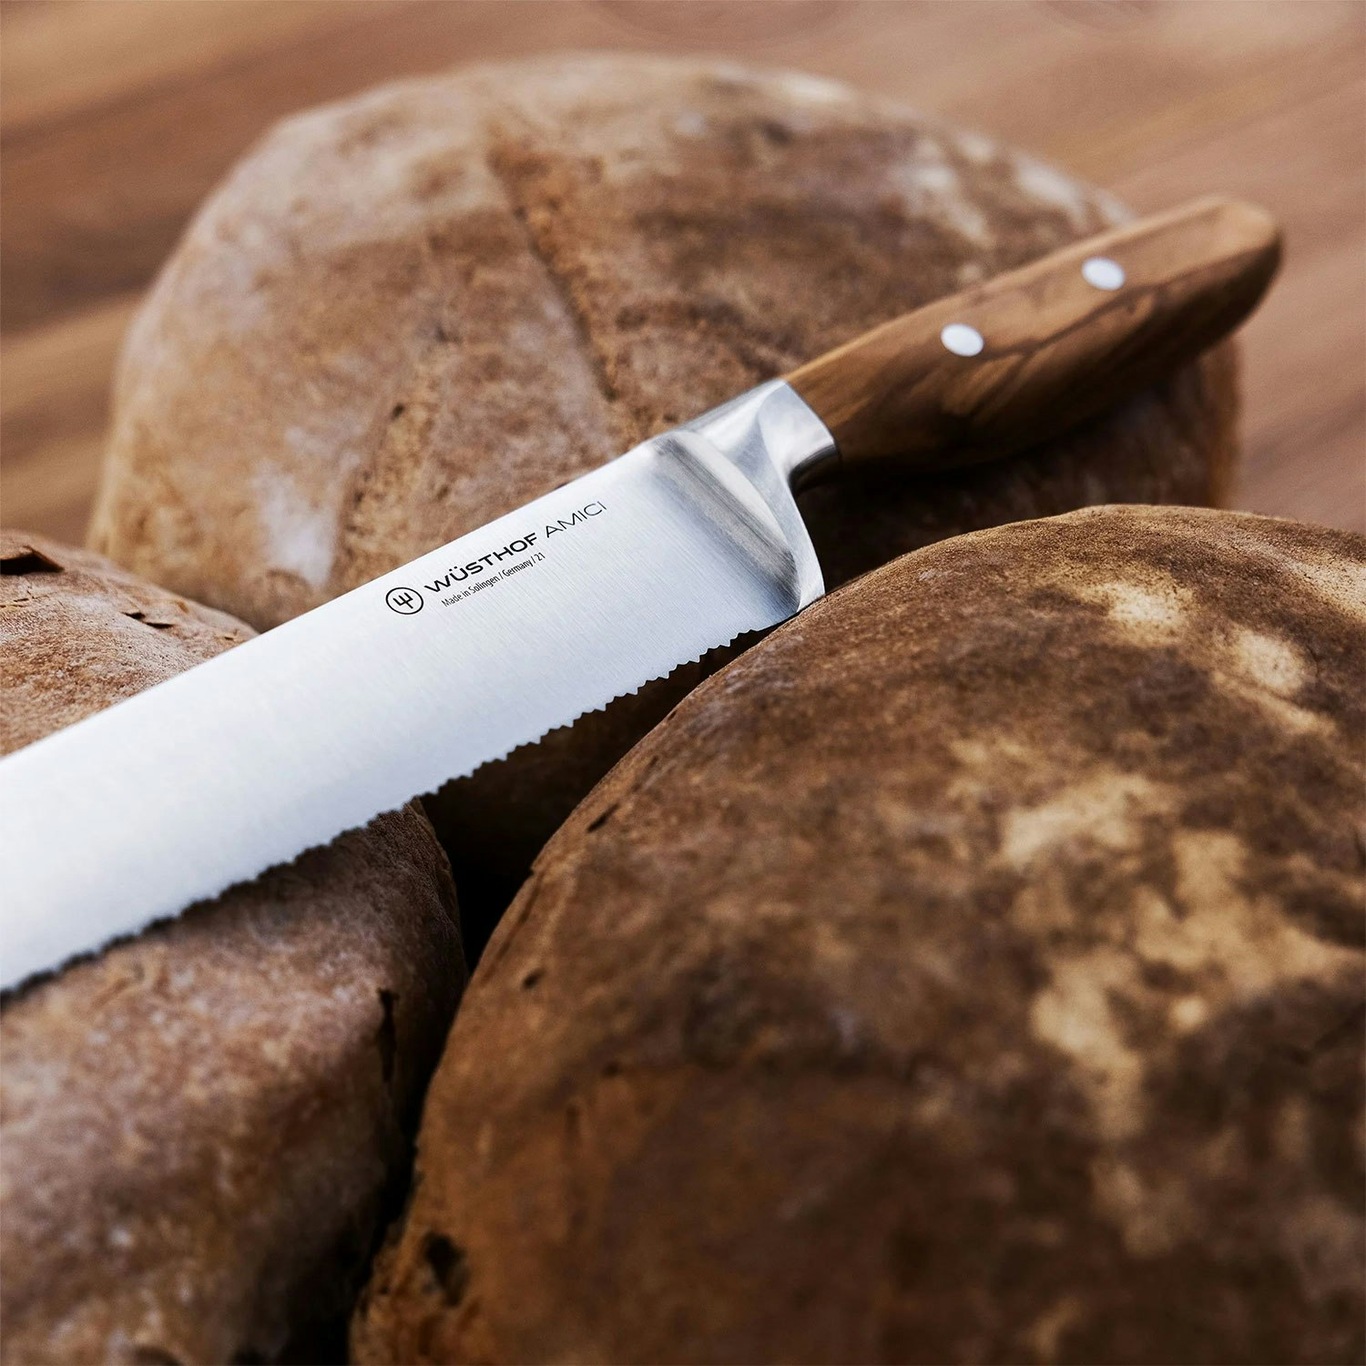 https://royaldesign.com/image/2/wusthof-amici-bread-knife-double-toothed-23-cm-olive-wood-1?w=800&quality=80